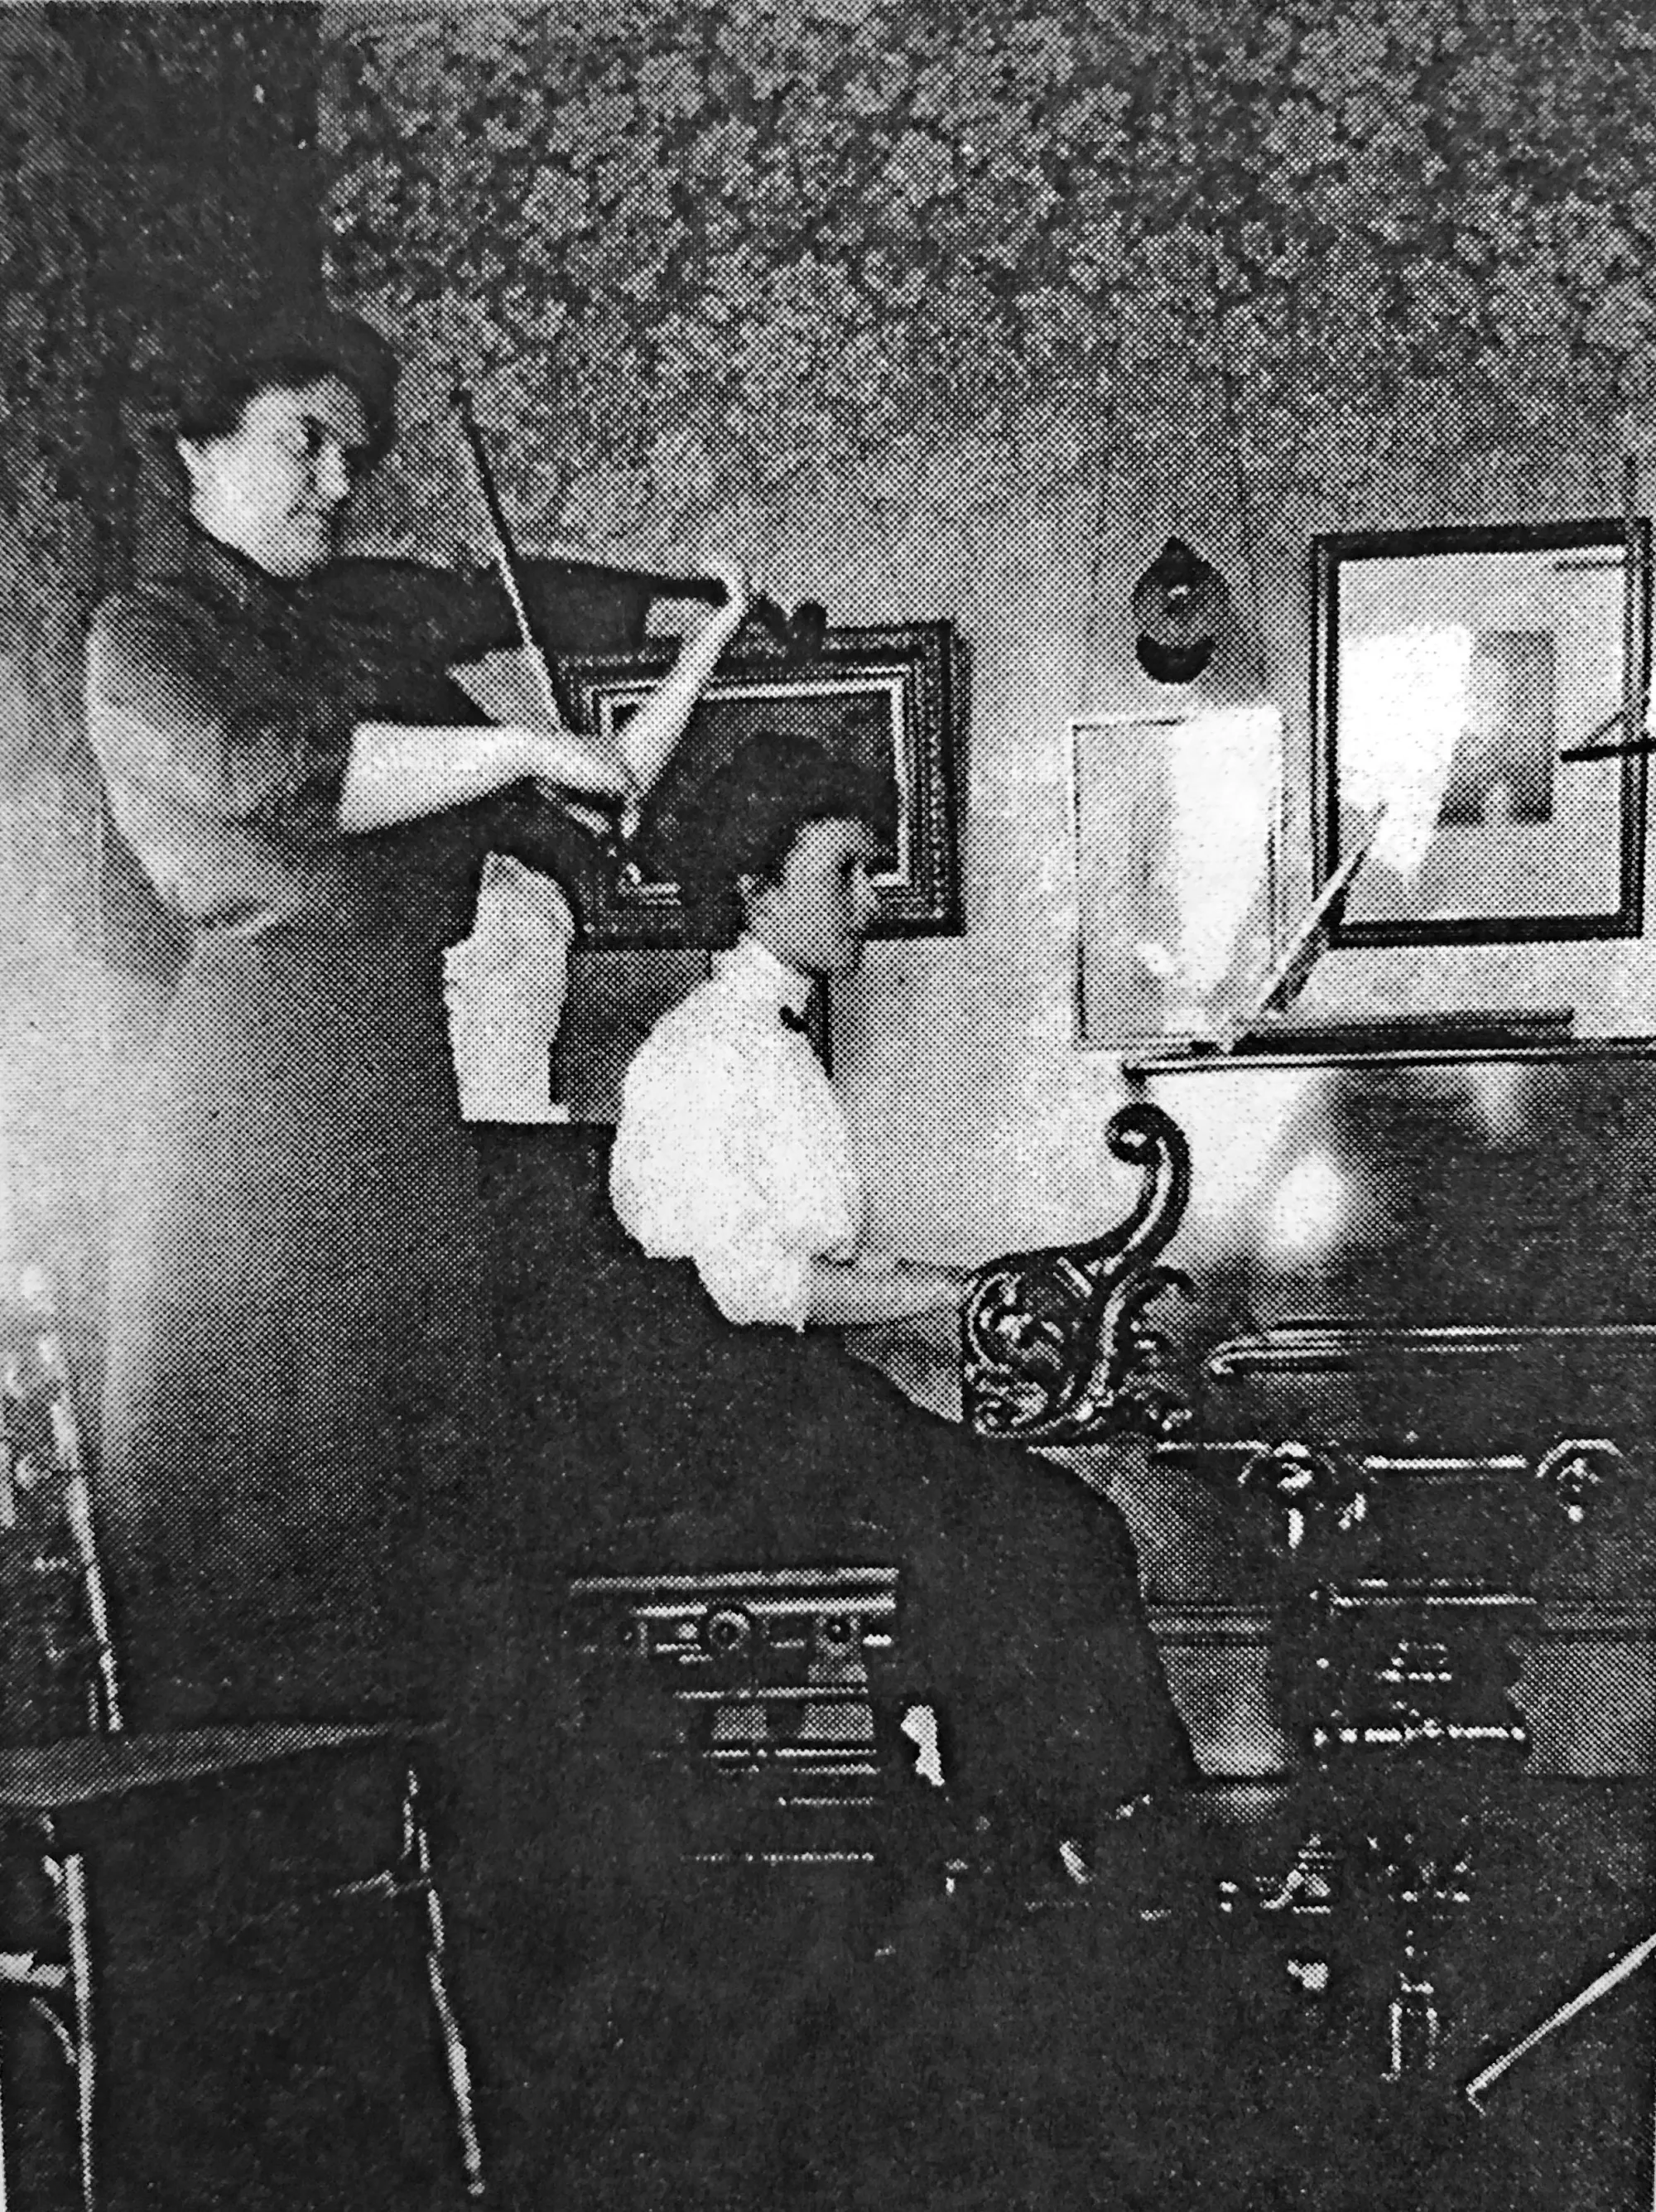 Antique photo of two women playing music — one standing playing the violin and the other sitting playing the piano.